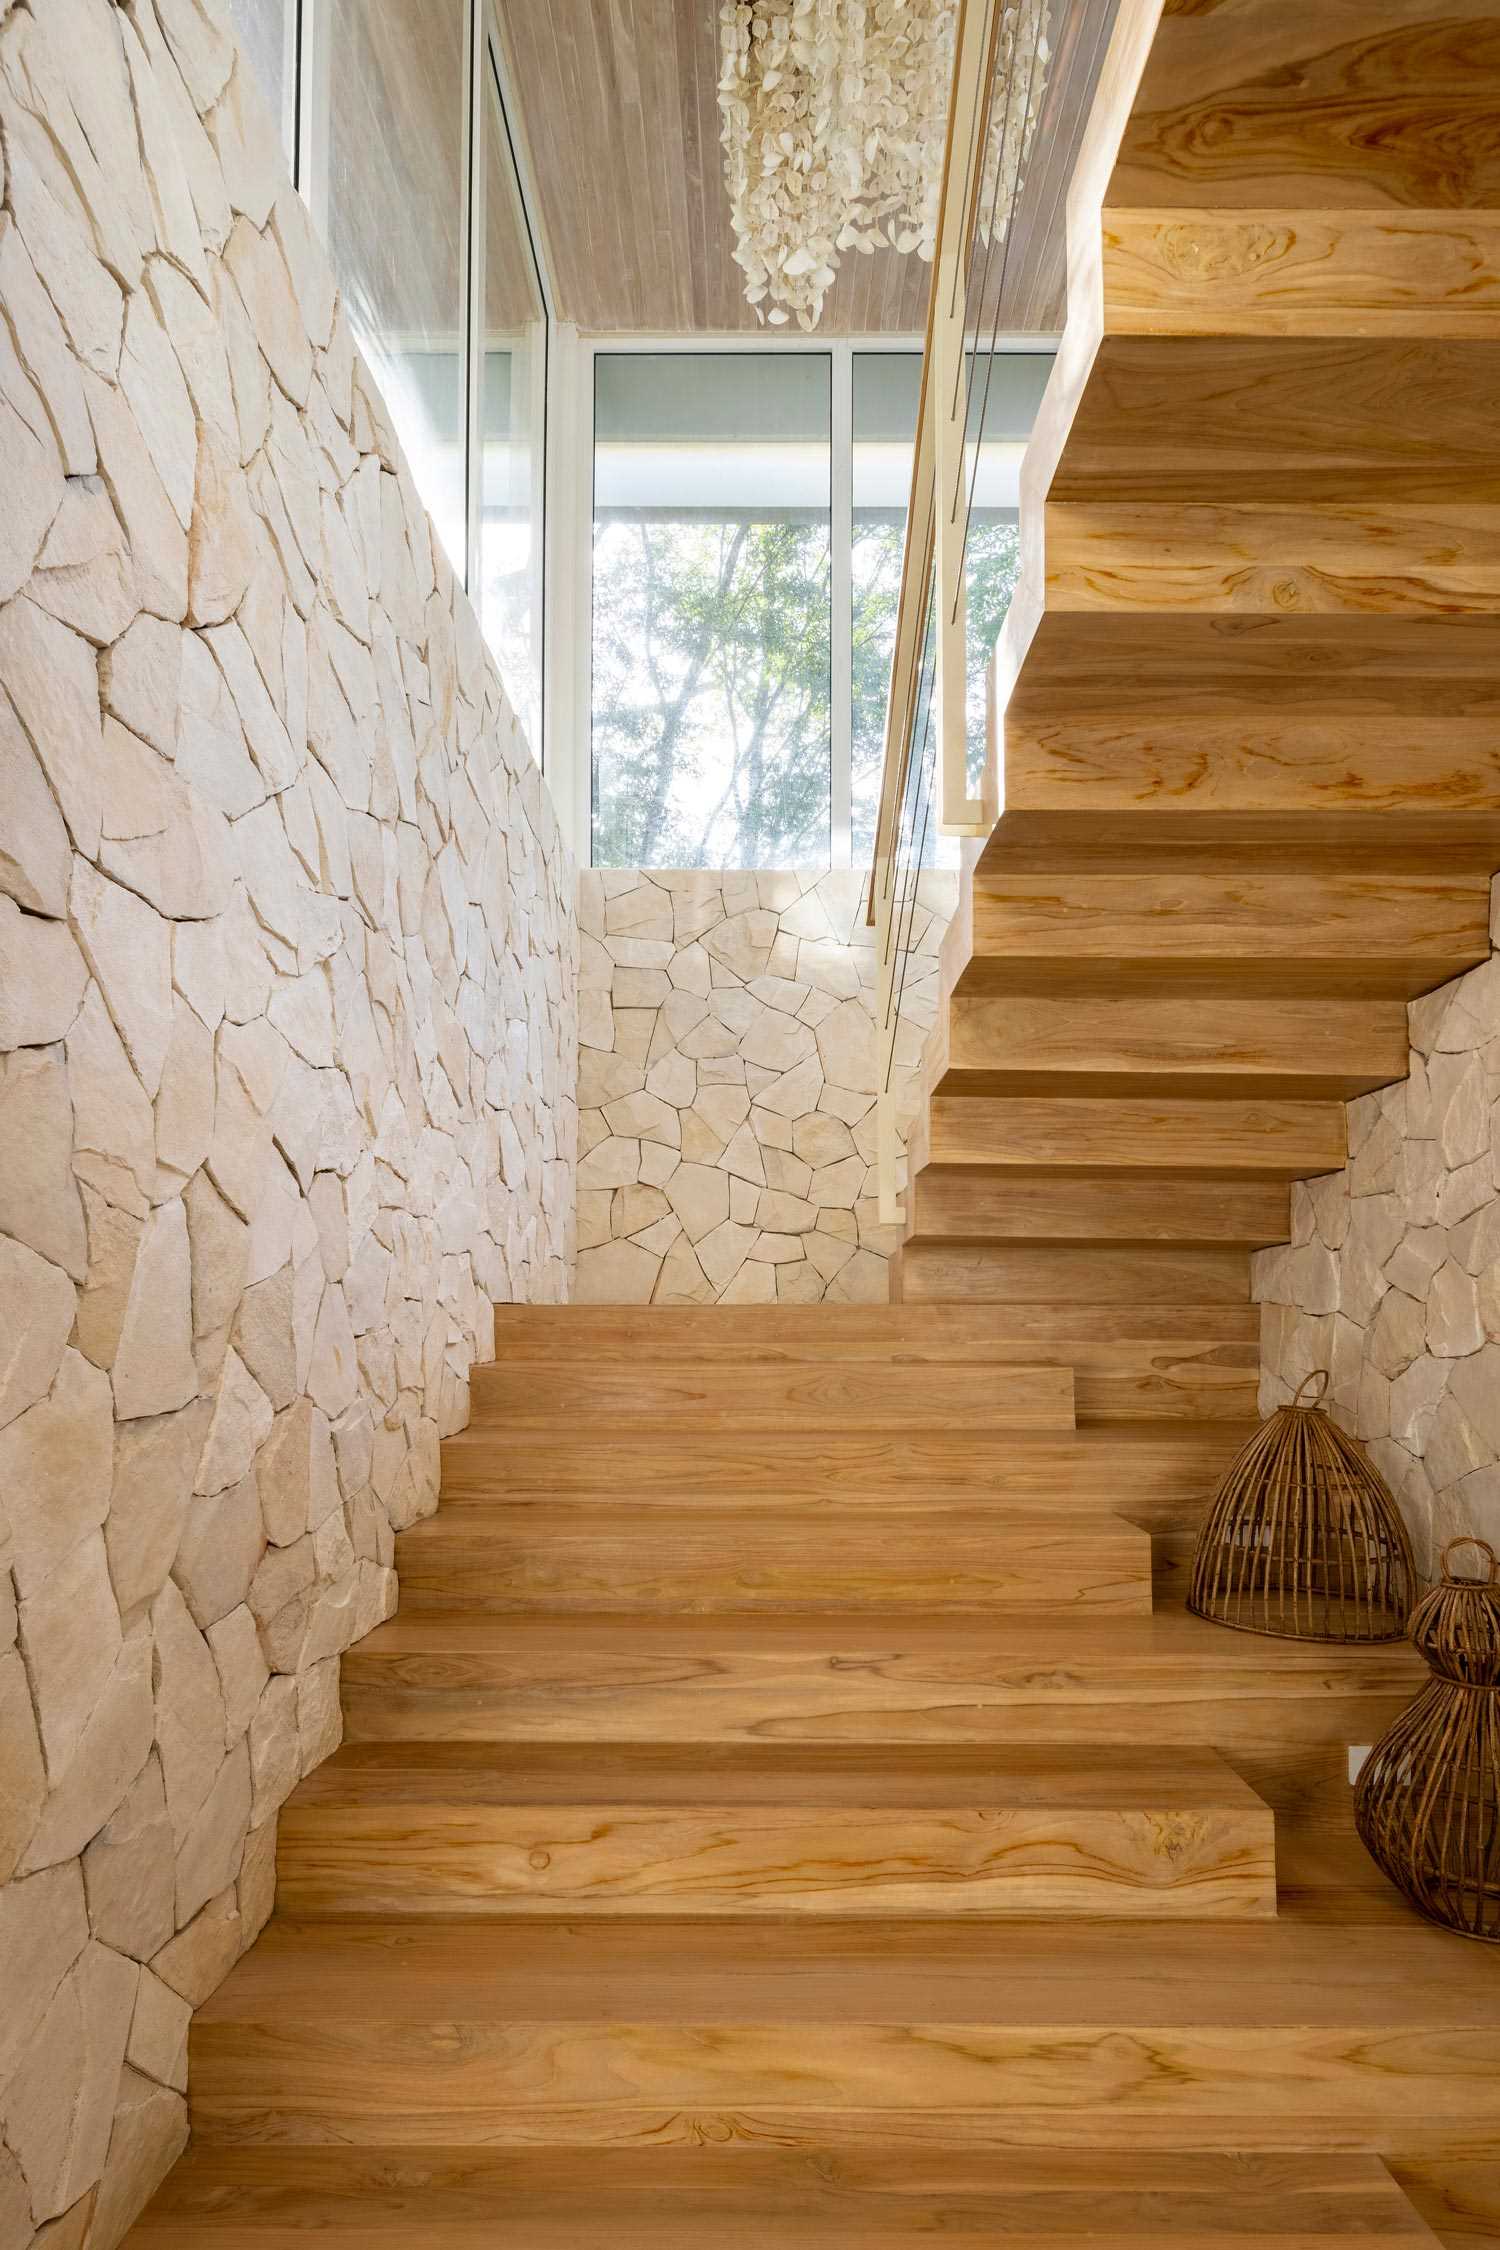 Modern wood stairs surrounded by stone walls and windows.